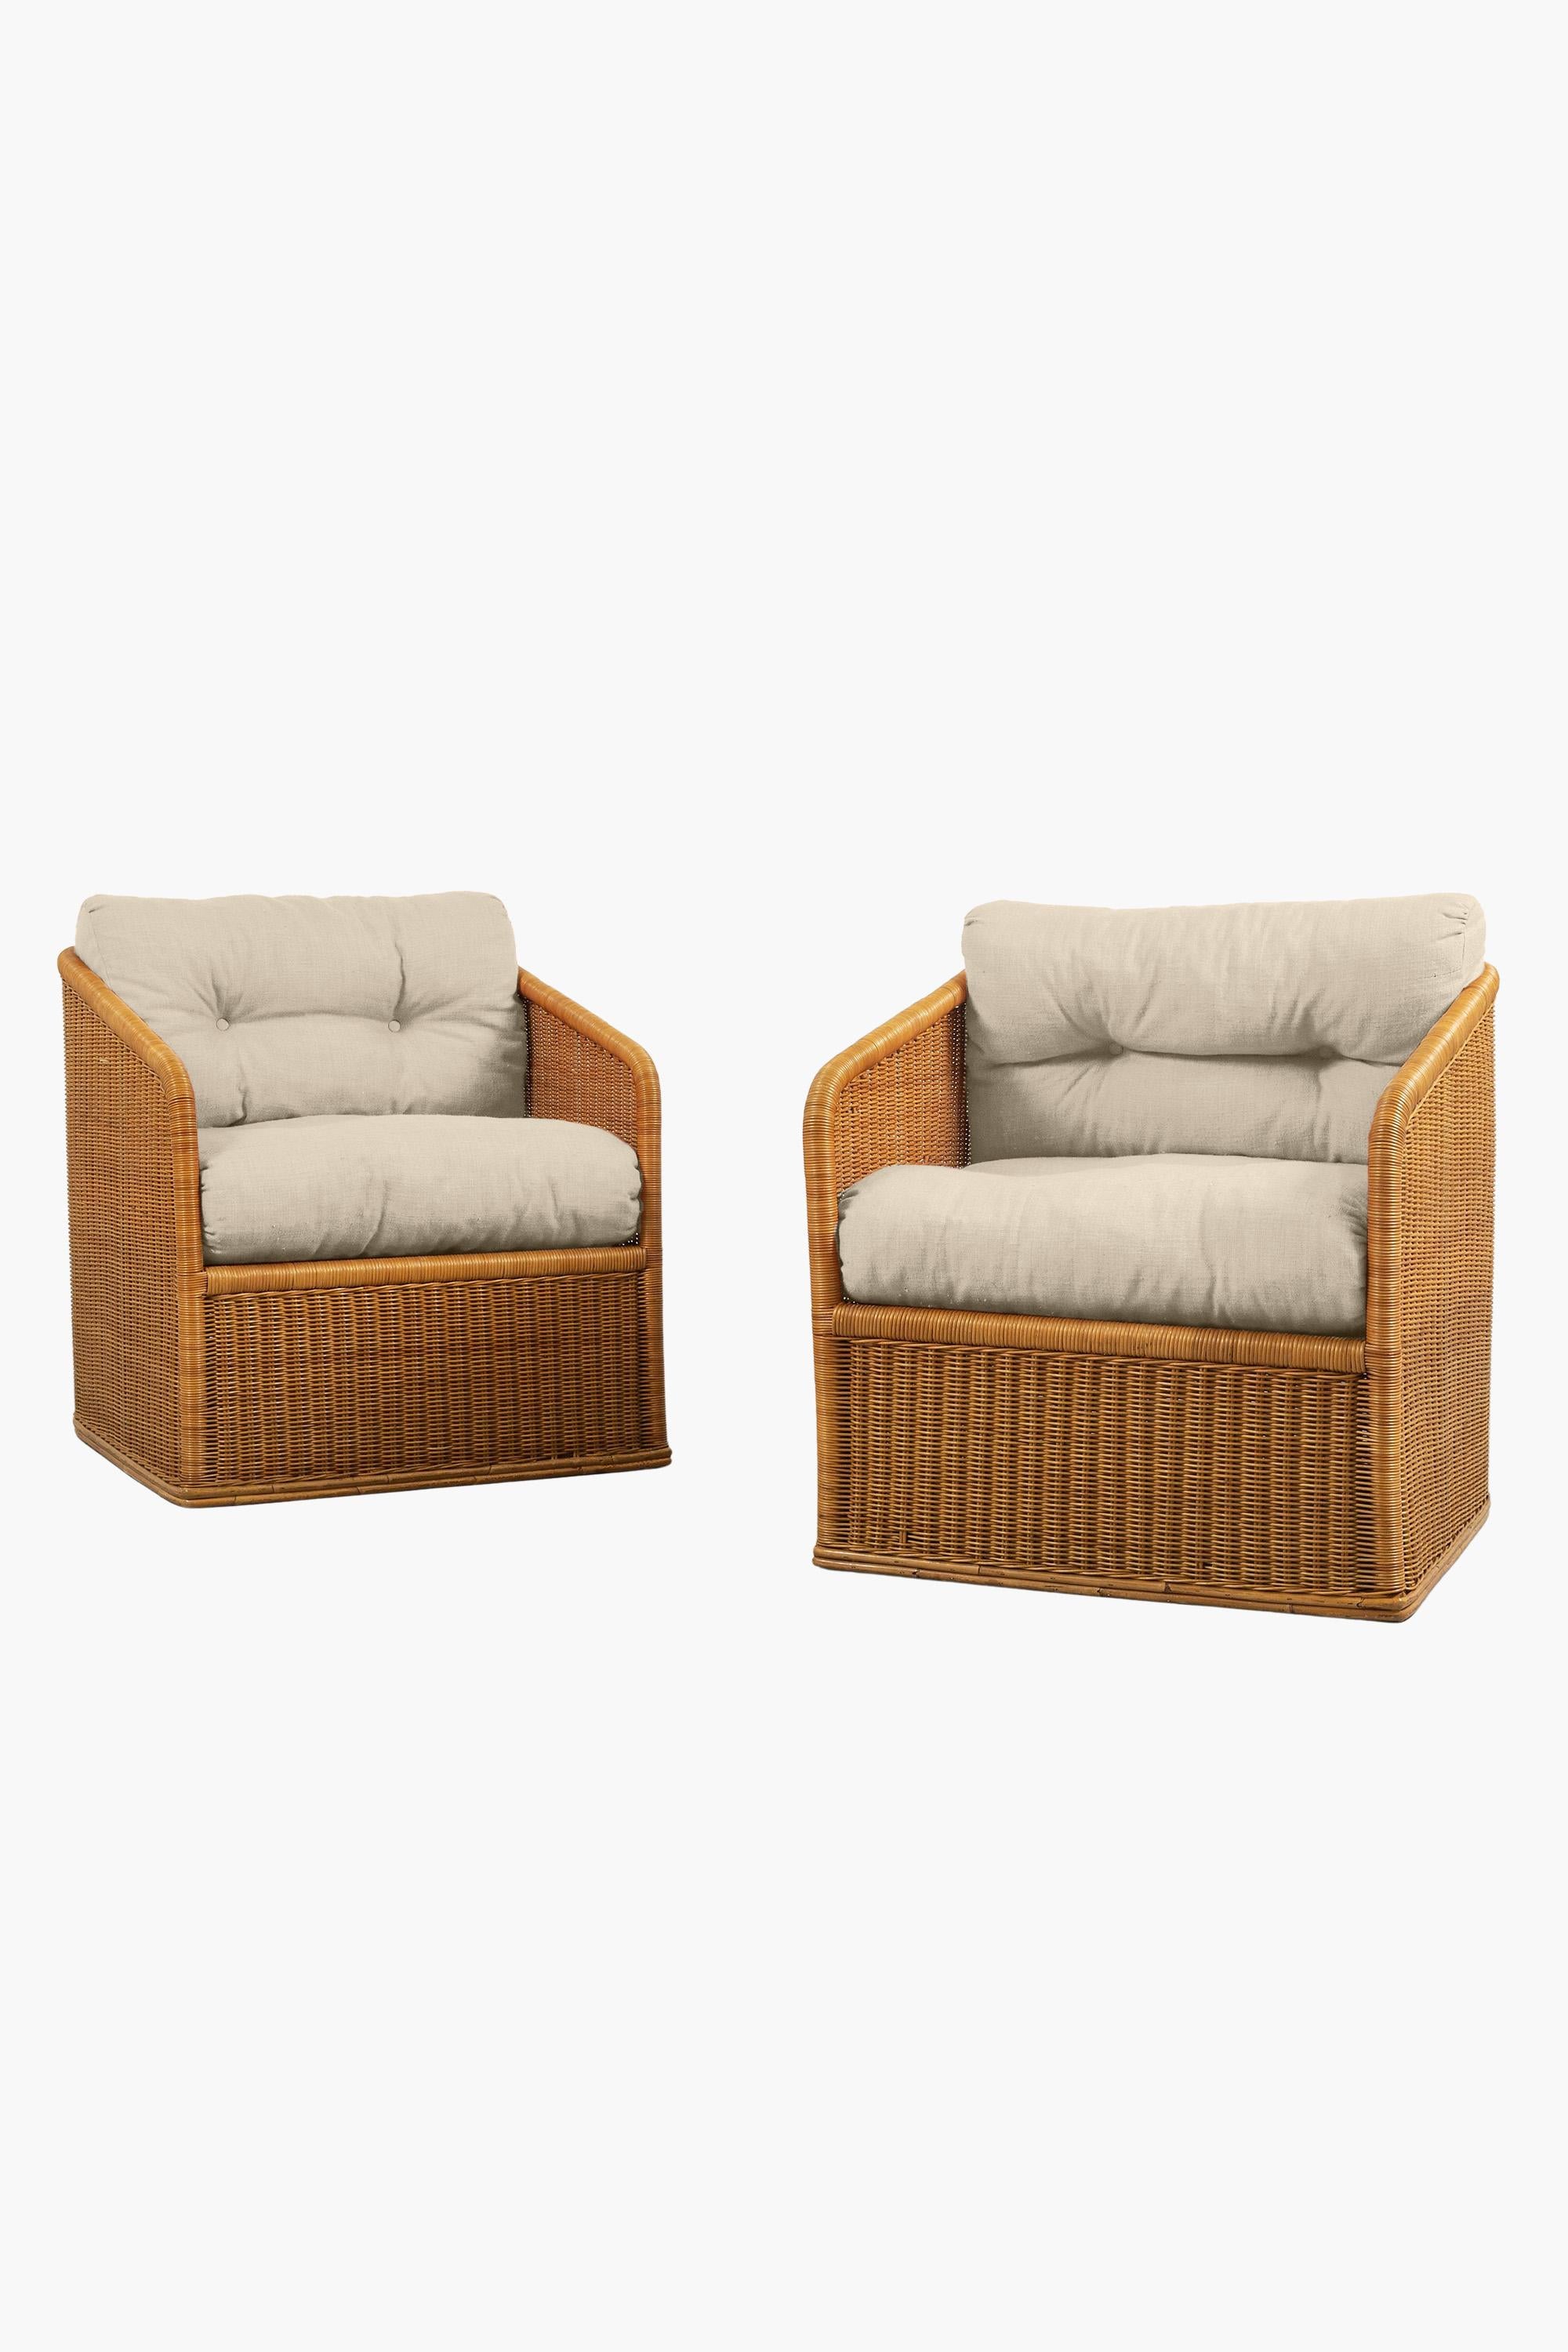 Woven Pair of 1970s Italian Rattan Armchairs For Sale